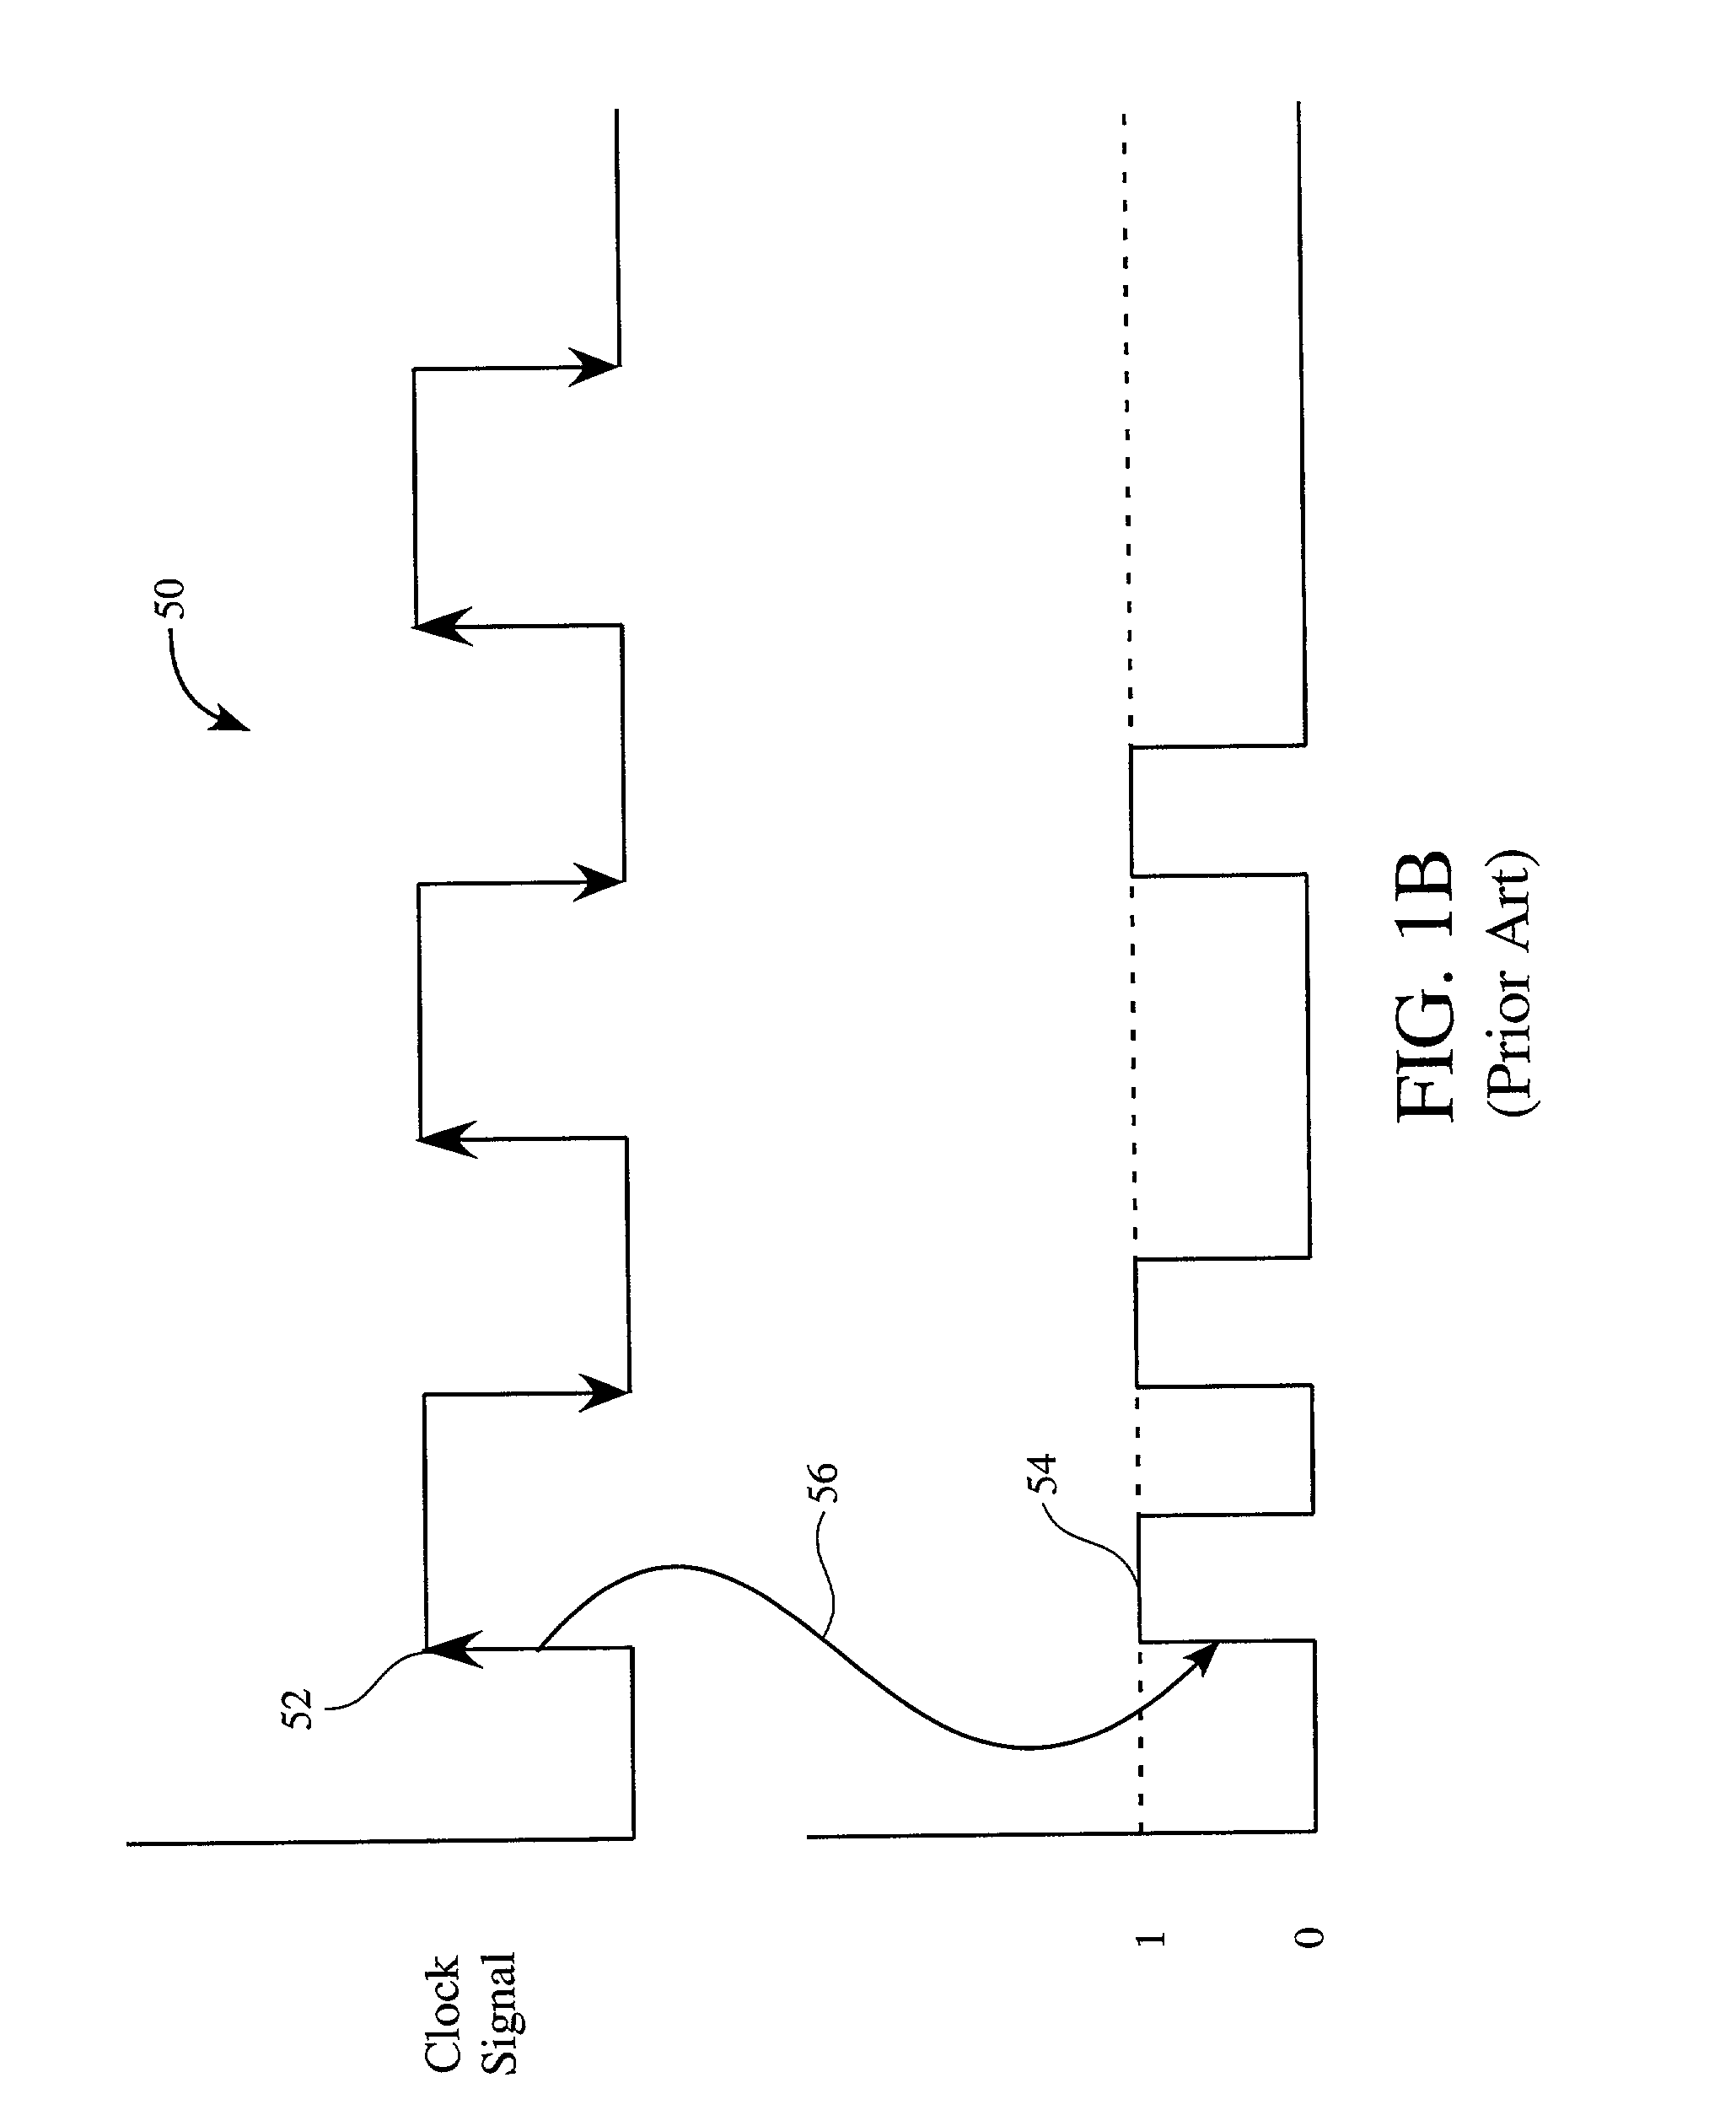 Method to transmit bits of data over a bus